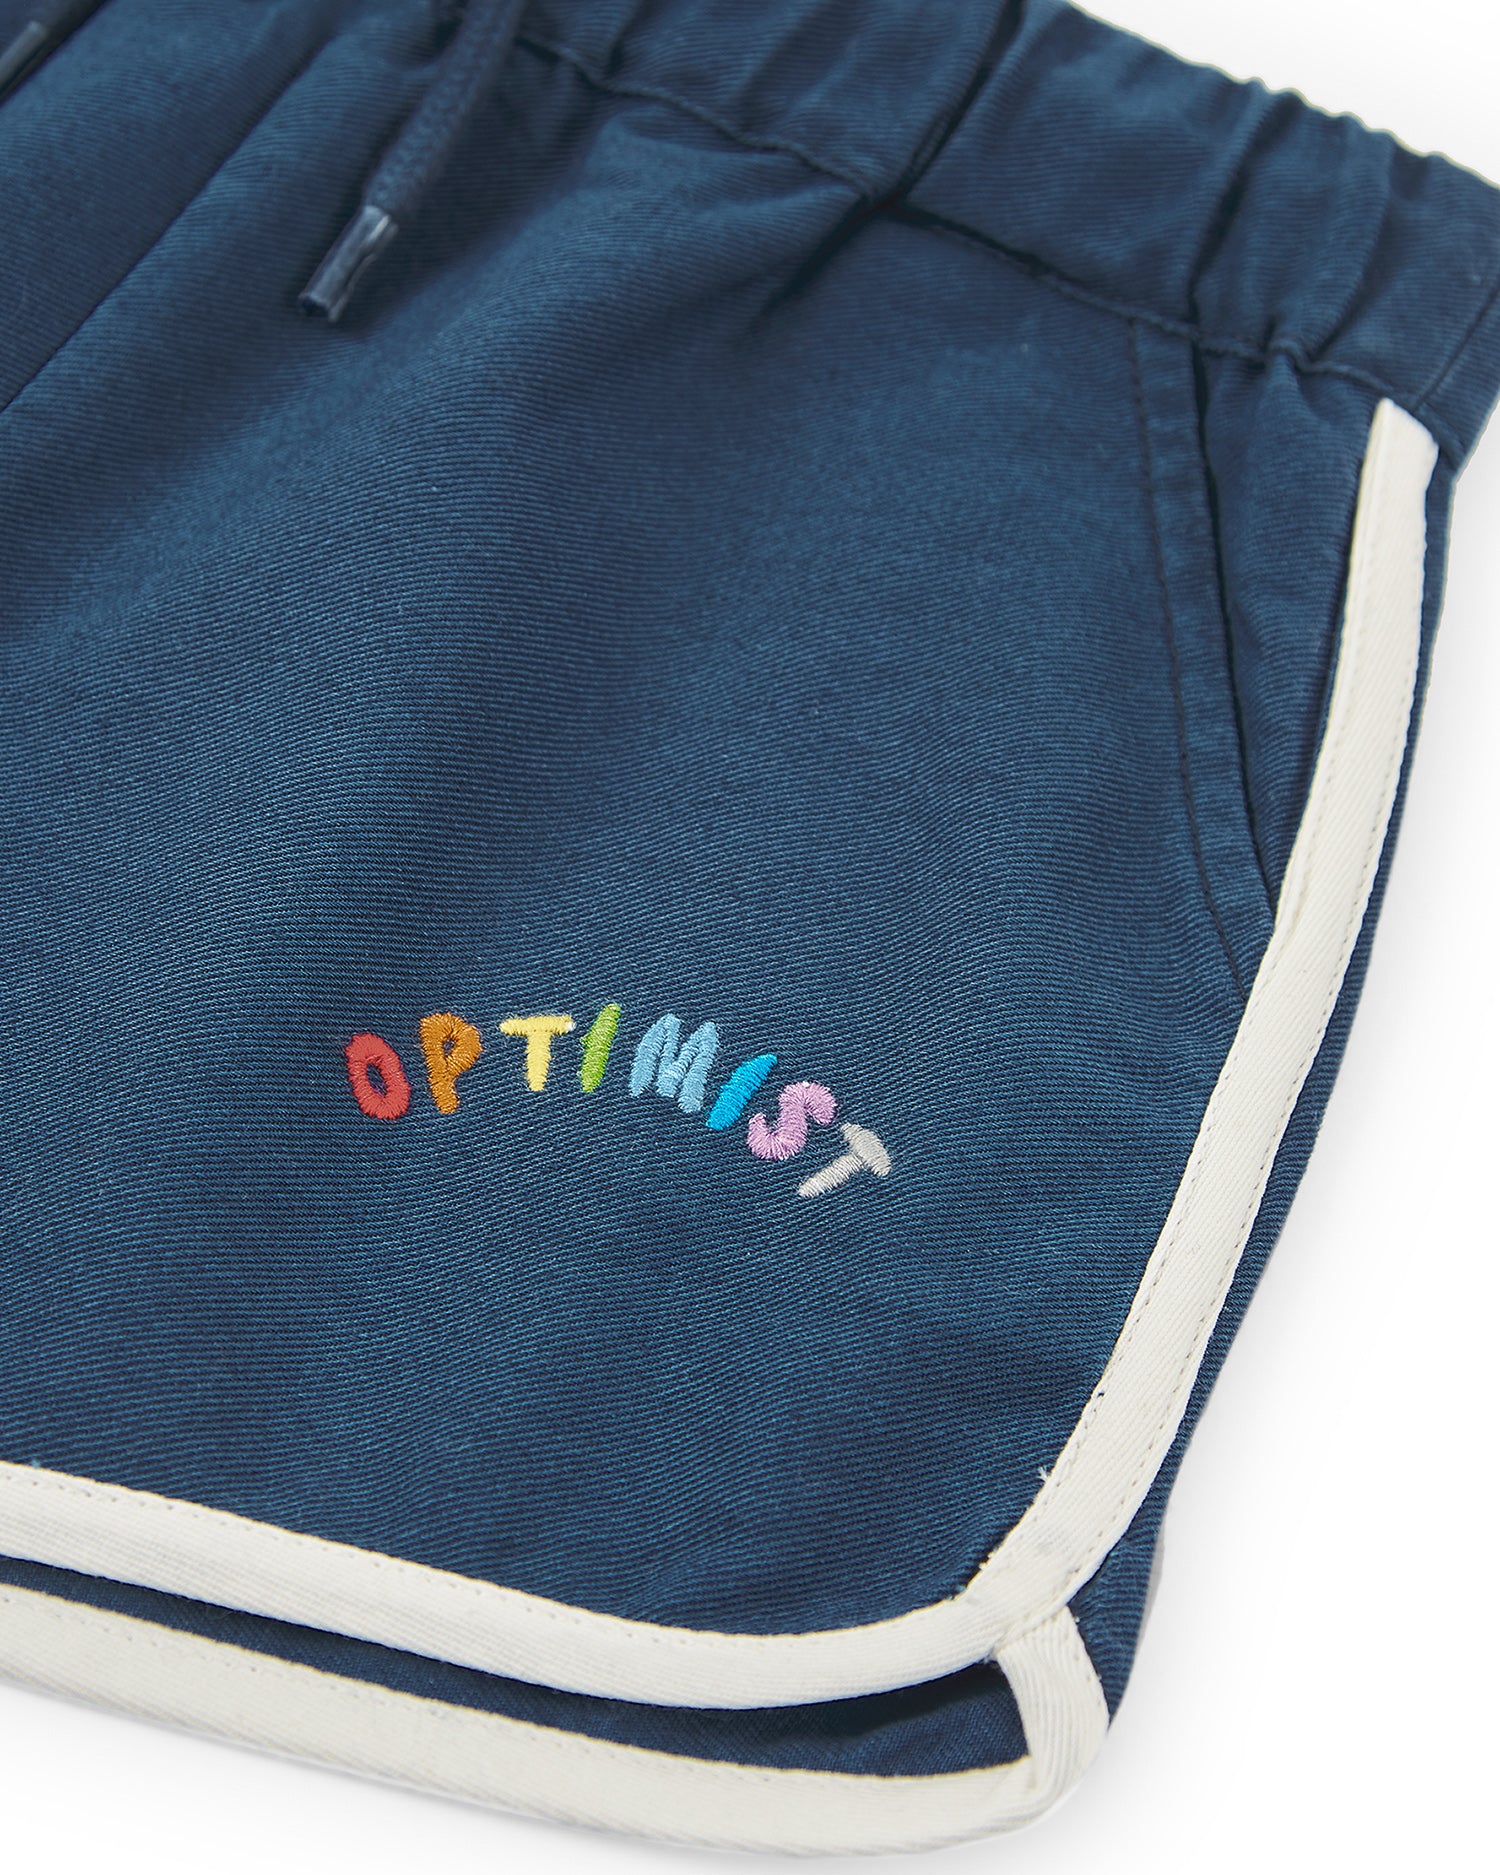 A close-up of a flat lay featuring a pair of blue track shorts with "be happy" embroidered on them